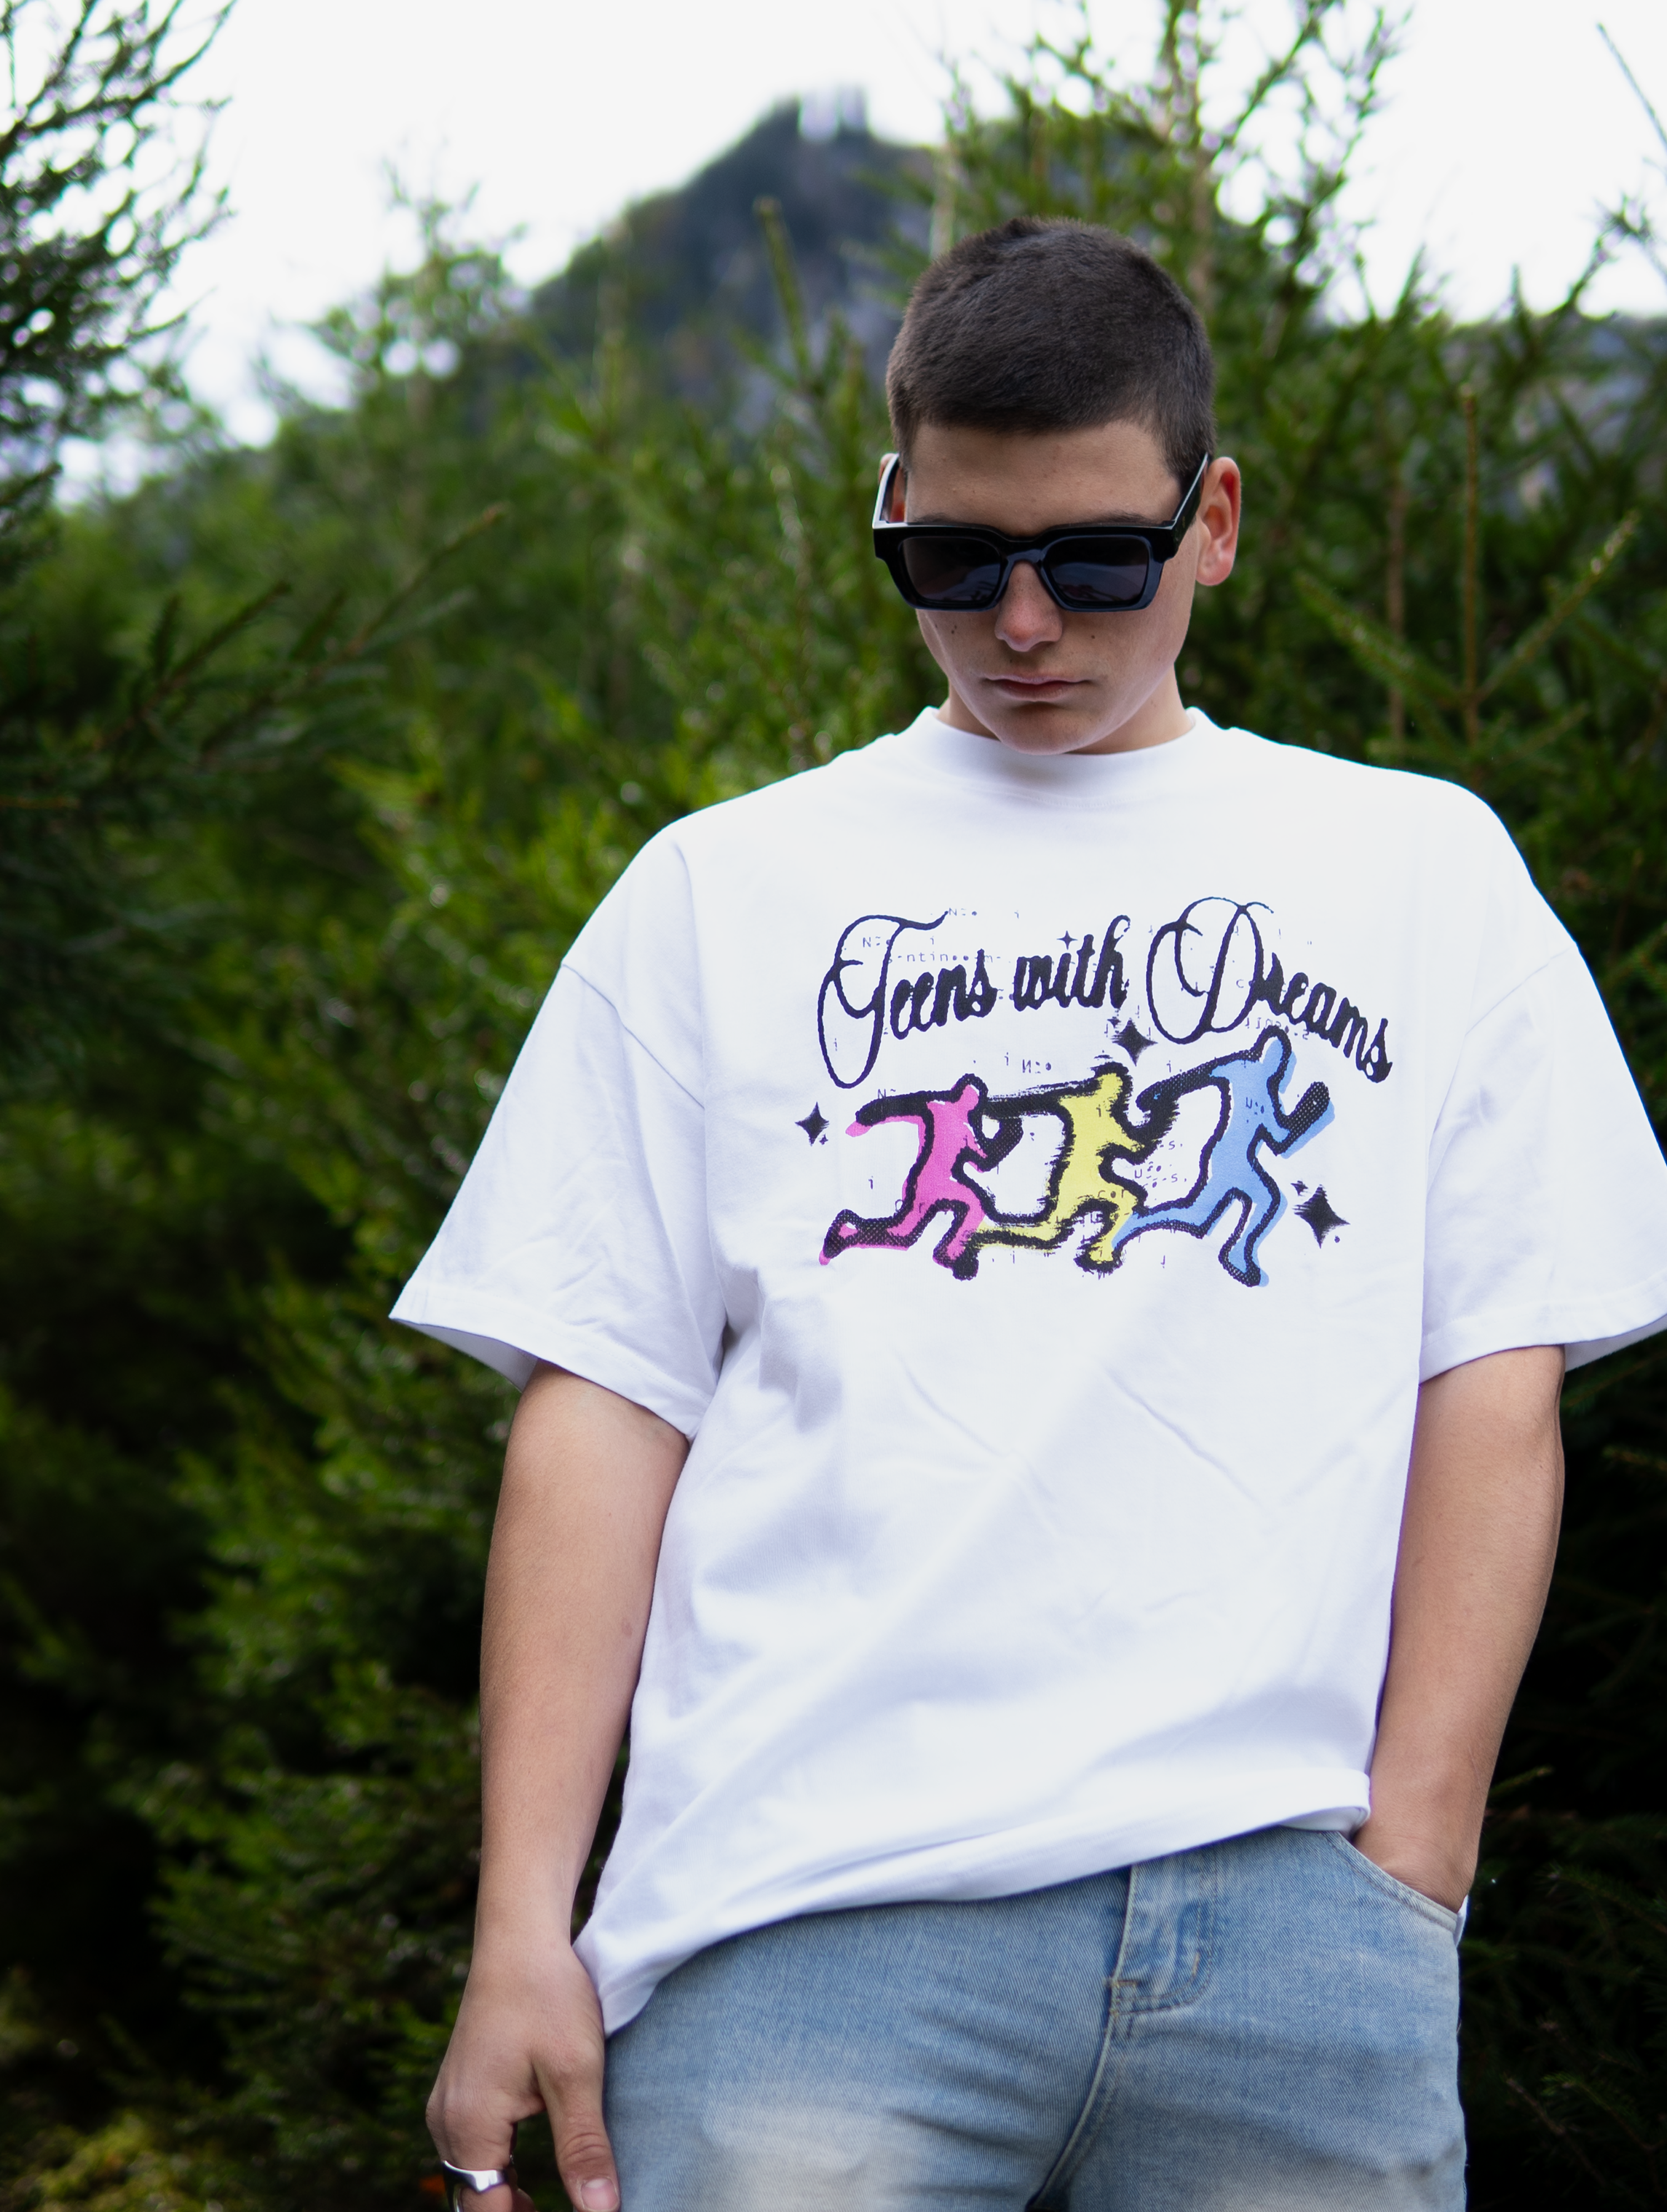 Teens with Dreams Tee - White